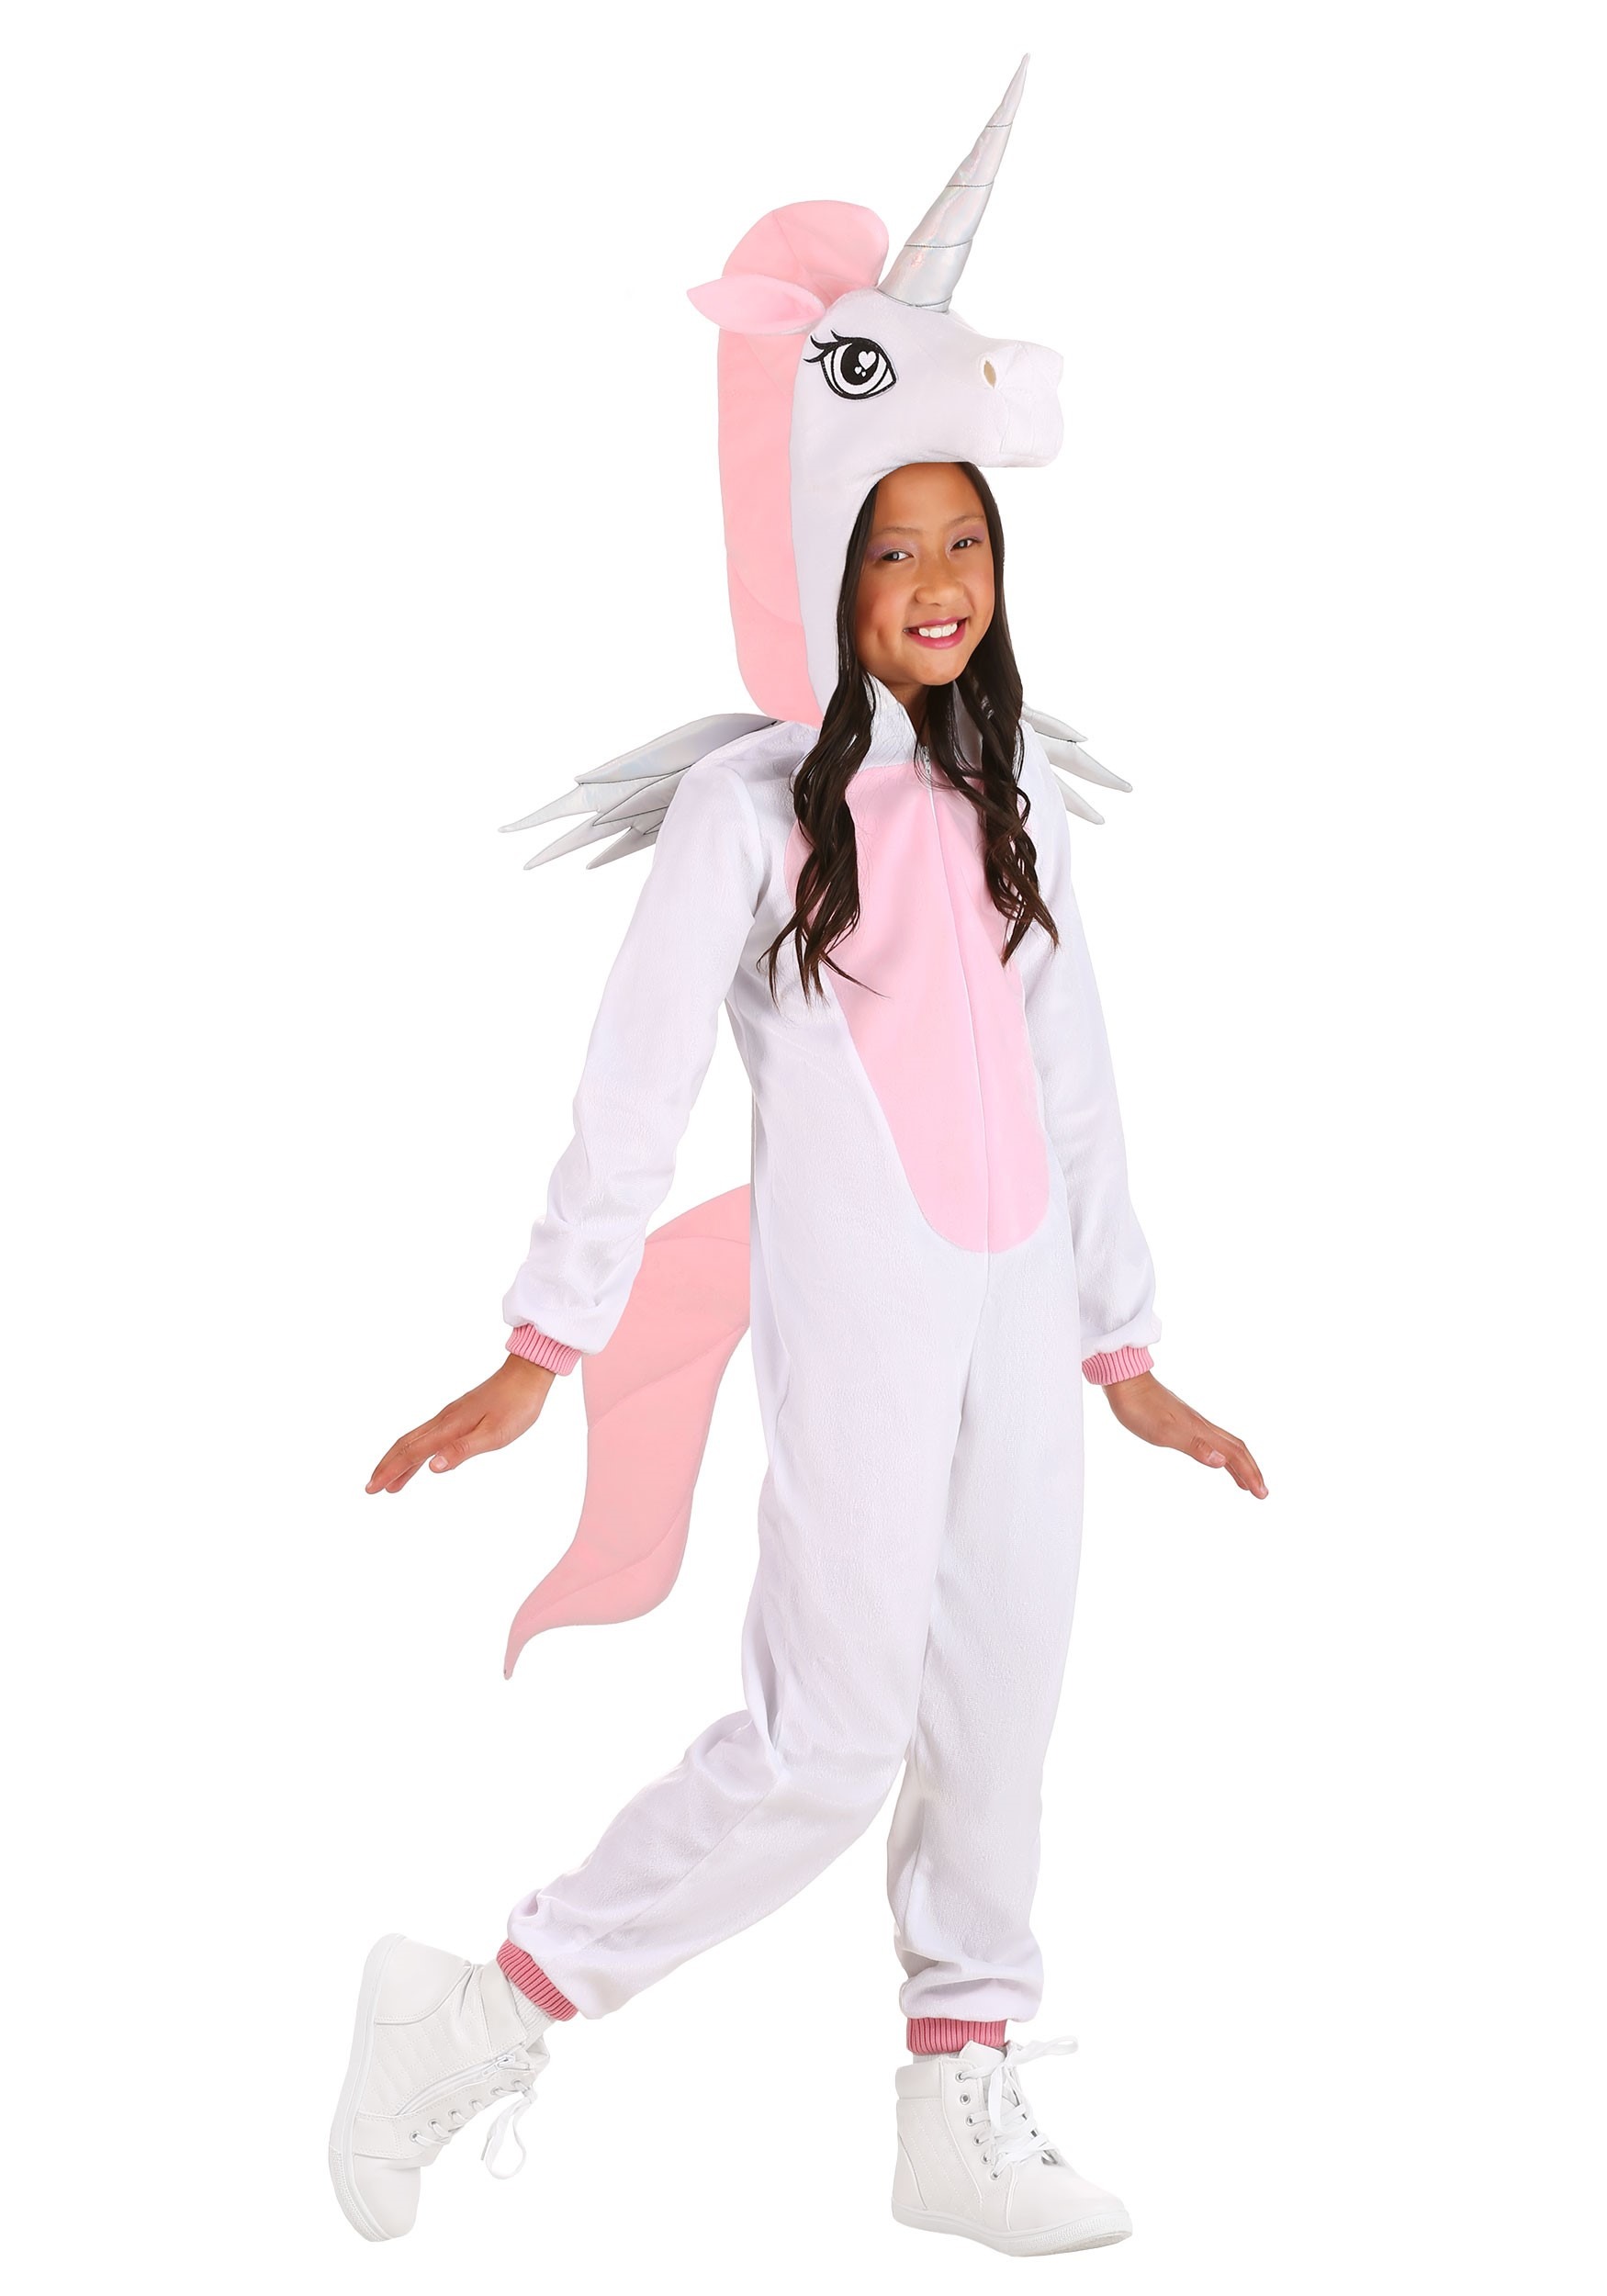 Photos - Fancy Dress Unicorn FUN Costumes  Jumpsuit Costume for Kids Pink/White 